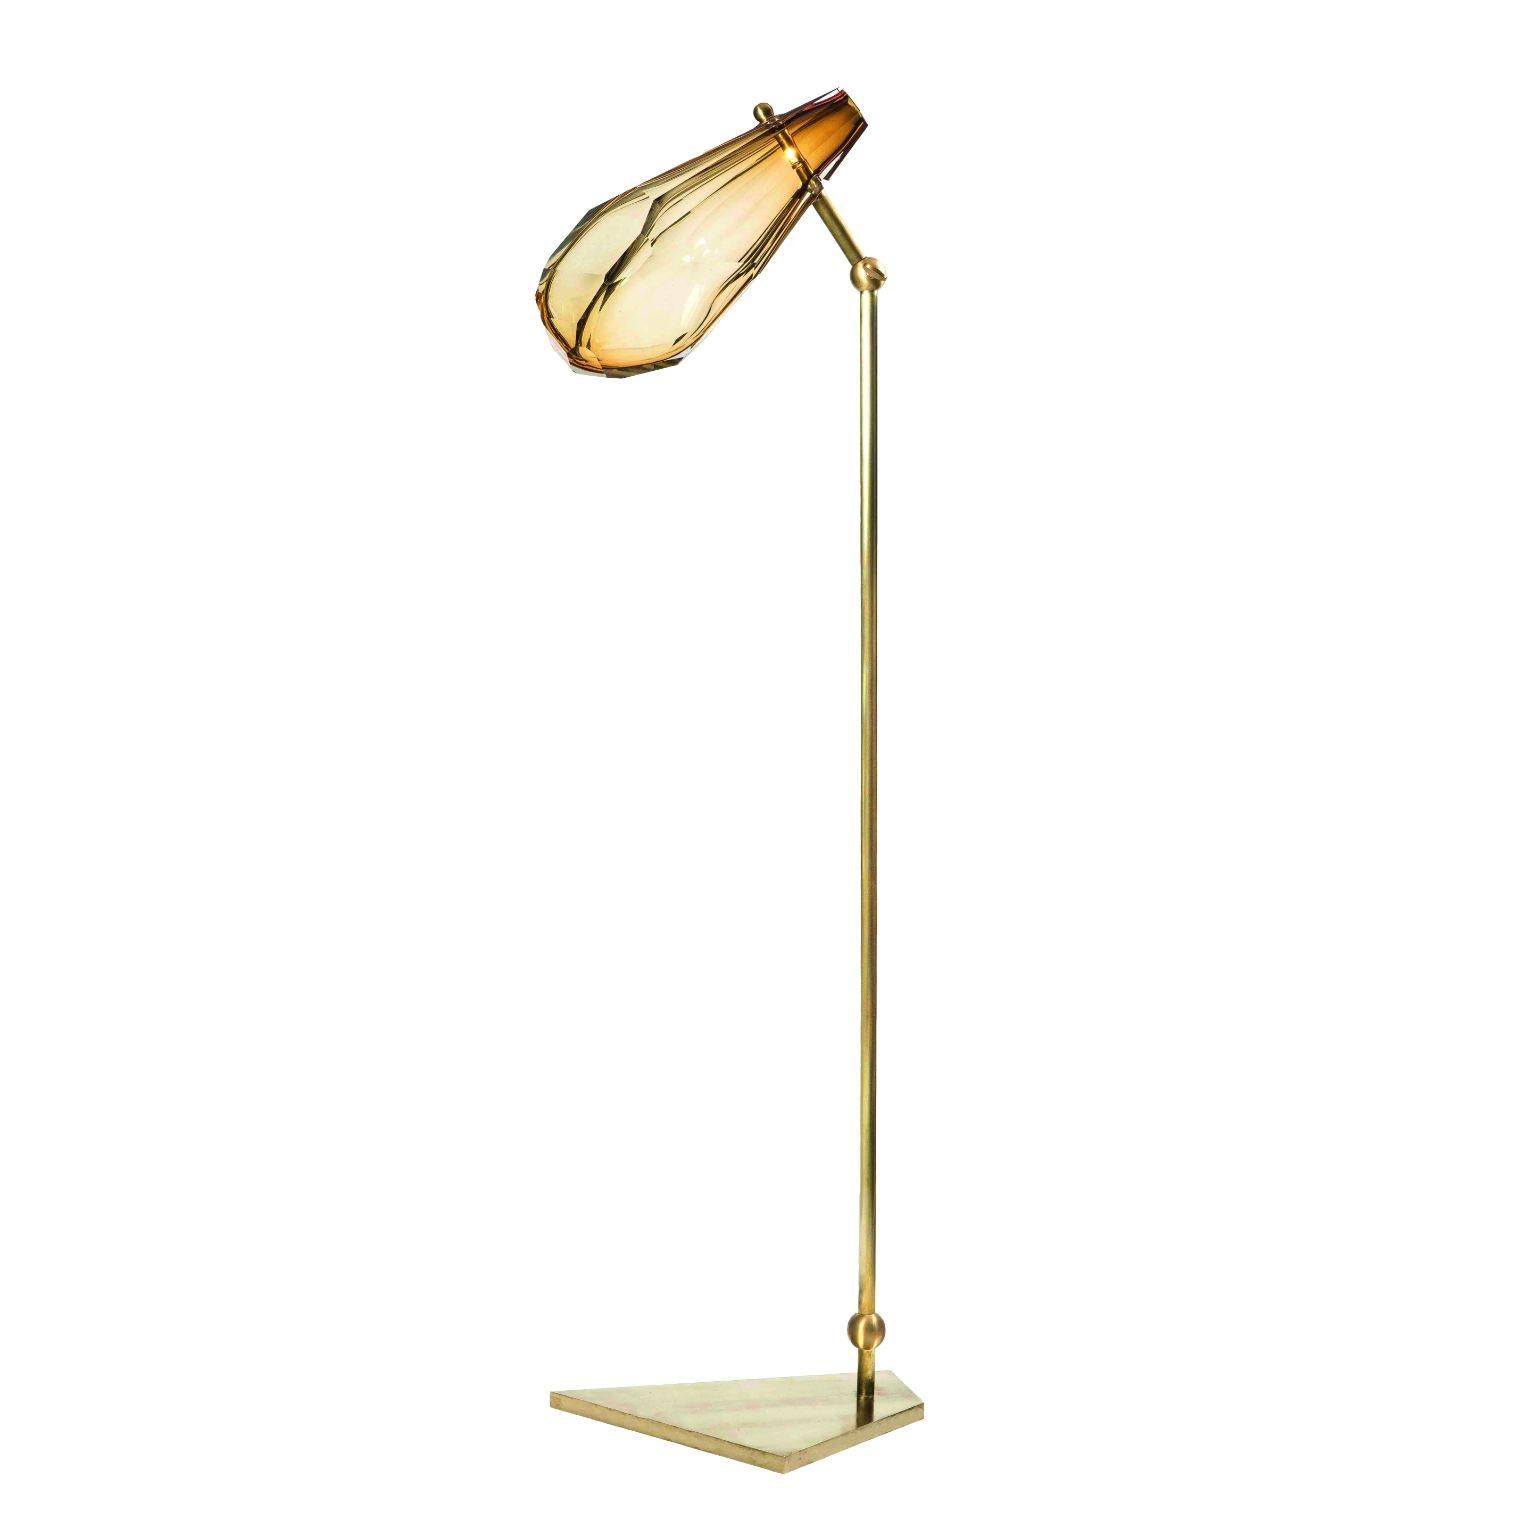 Adamas floor lamp by Emilie Lemardeley
Dimensions: D 40 x H 160 cm
Materials: Brass, glass
Weight: 35 kg

The ADAMAS lightings take their inspiration from Greek myth; the story of a young man transformed into a precious stone, a diamond, by the